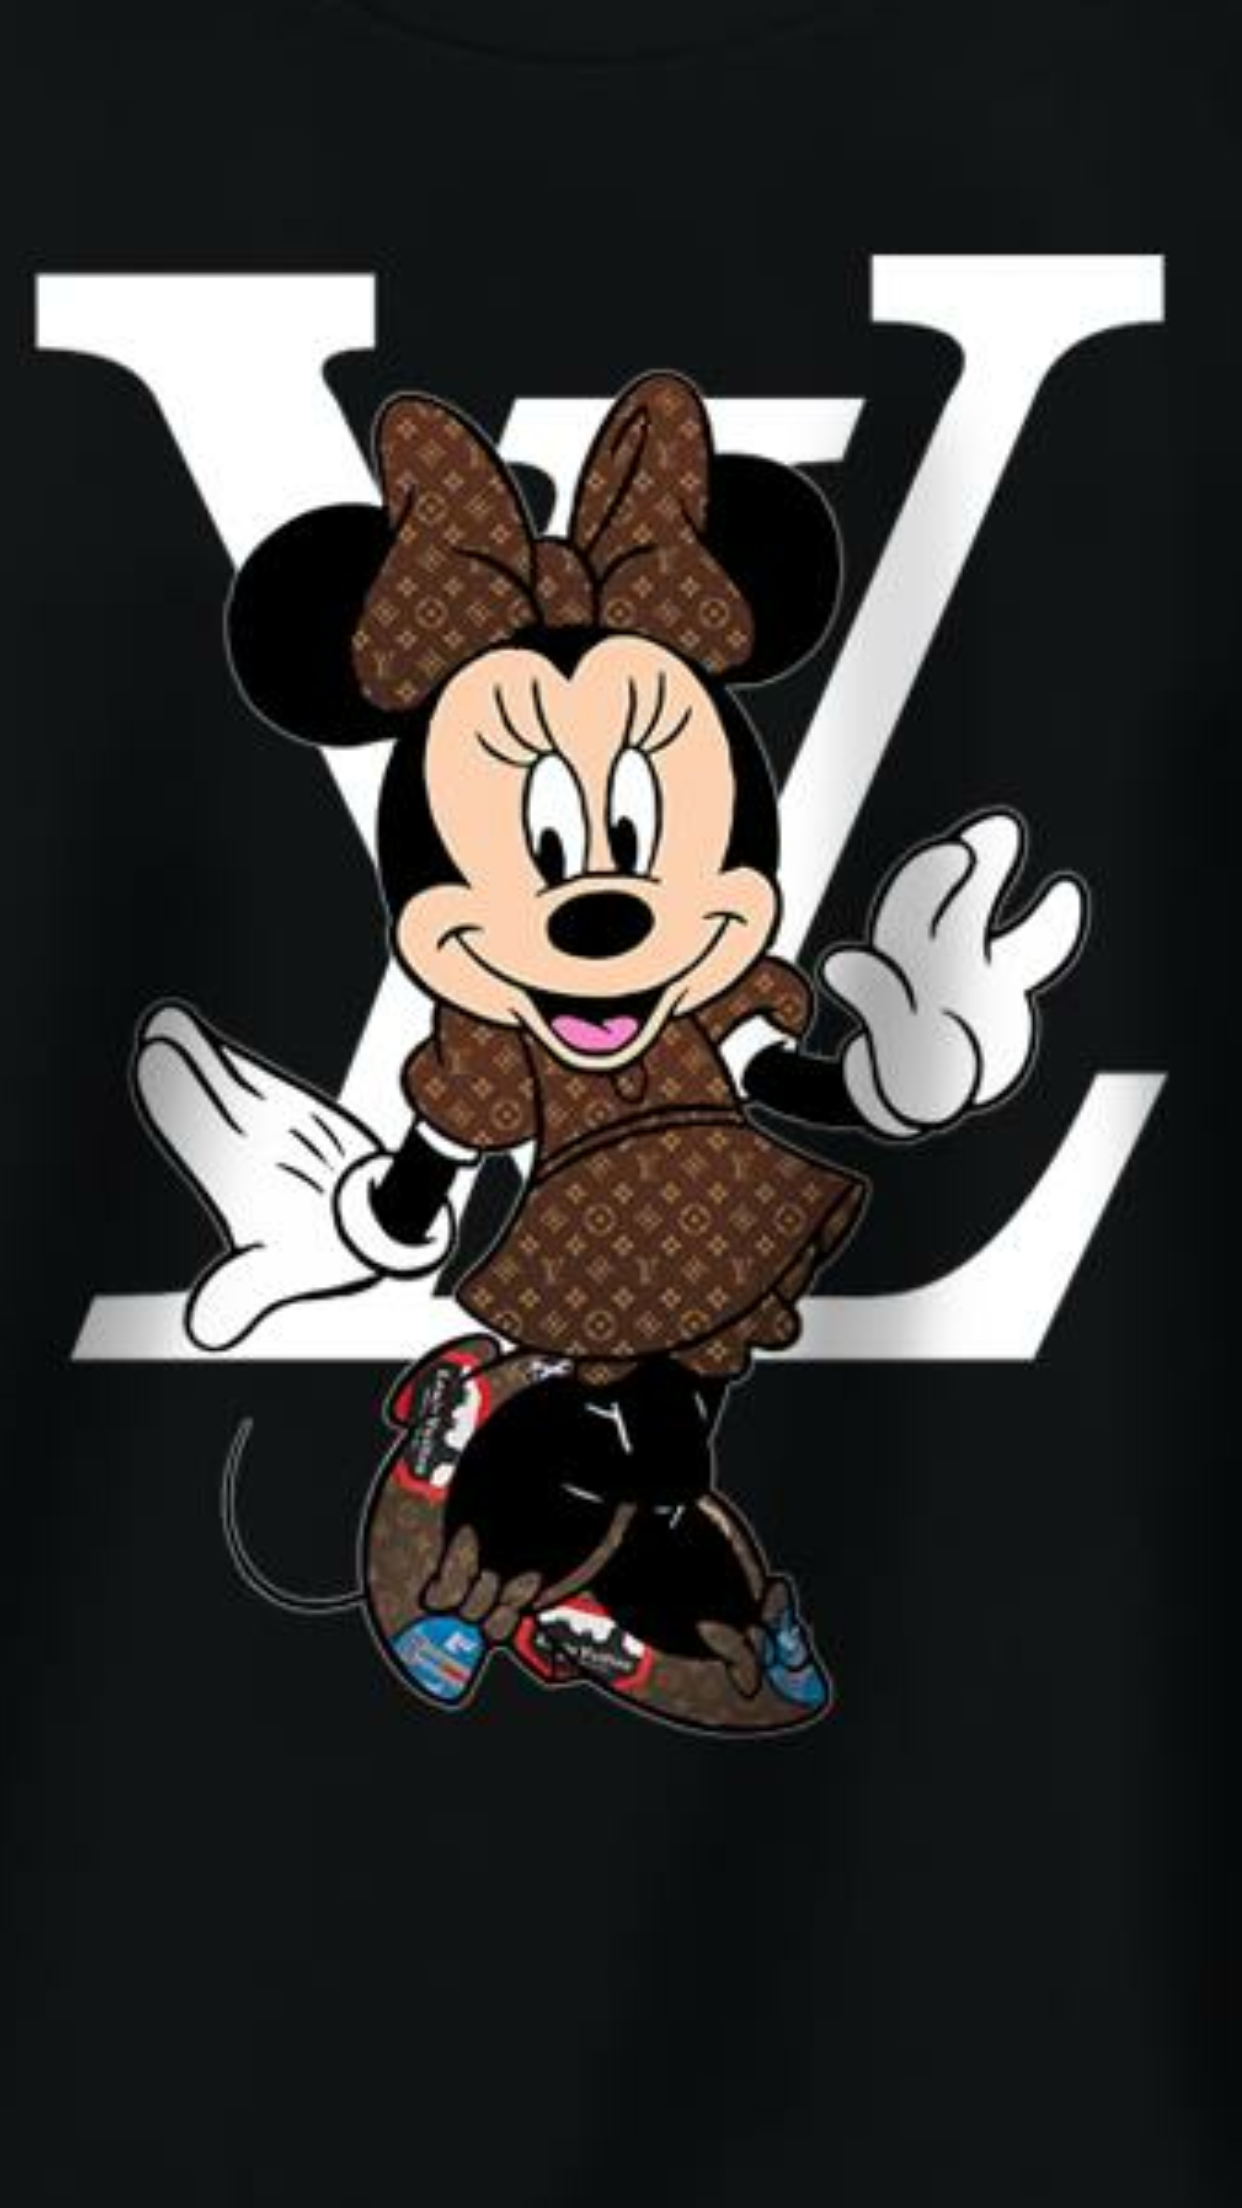 Mickey Mouse Gucci Wallpaper hd, picture, image